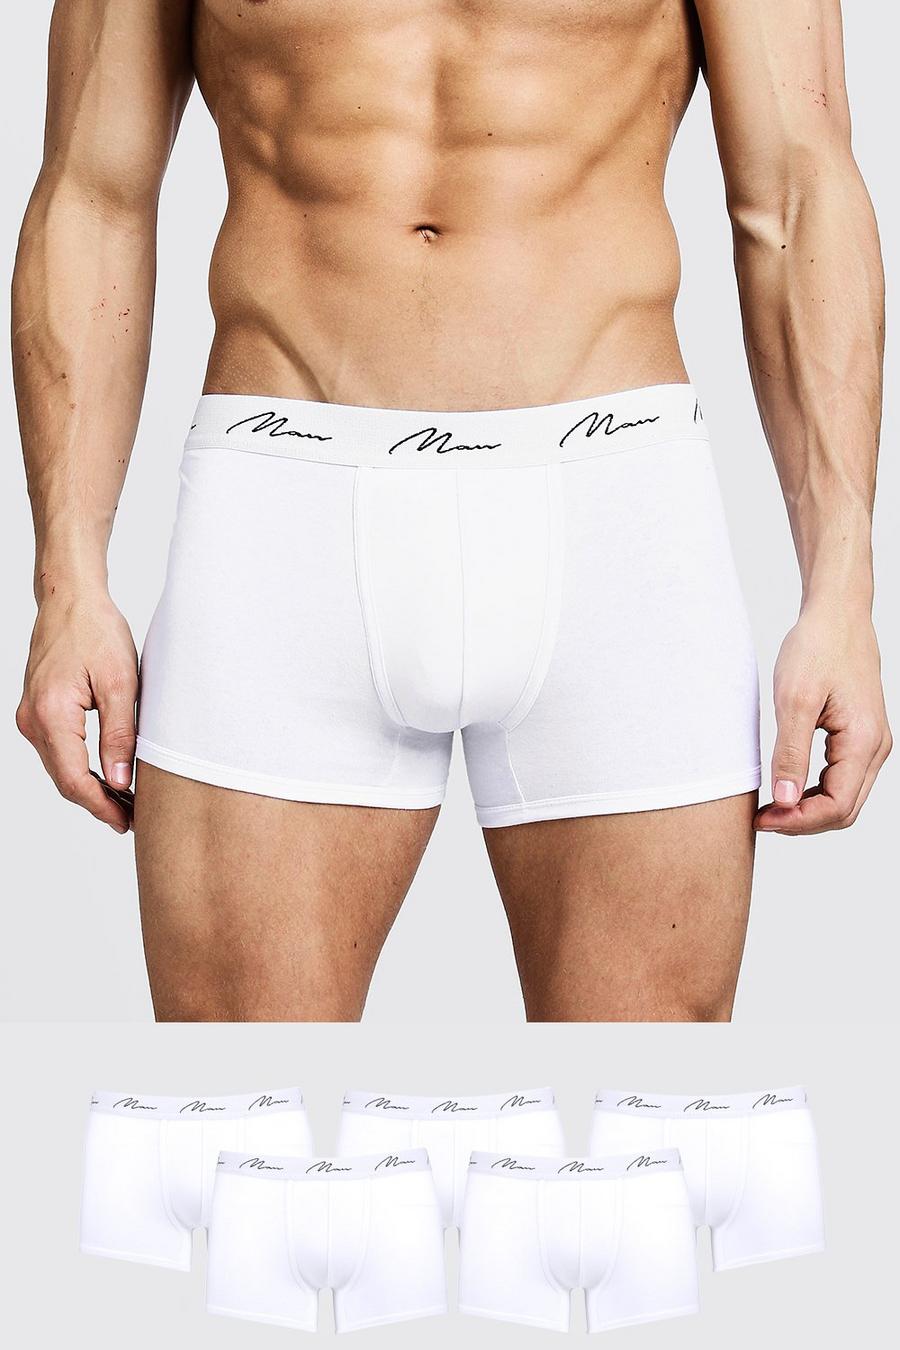 Pack de 5 calzoncillos con firma MAN, Blanco bianco image number 1